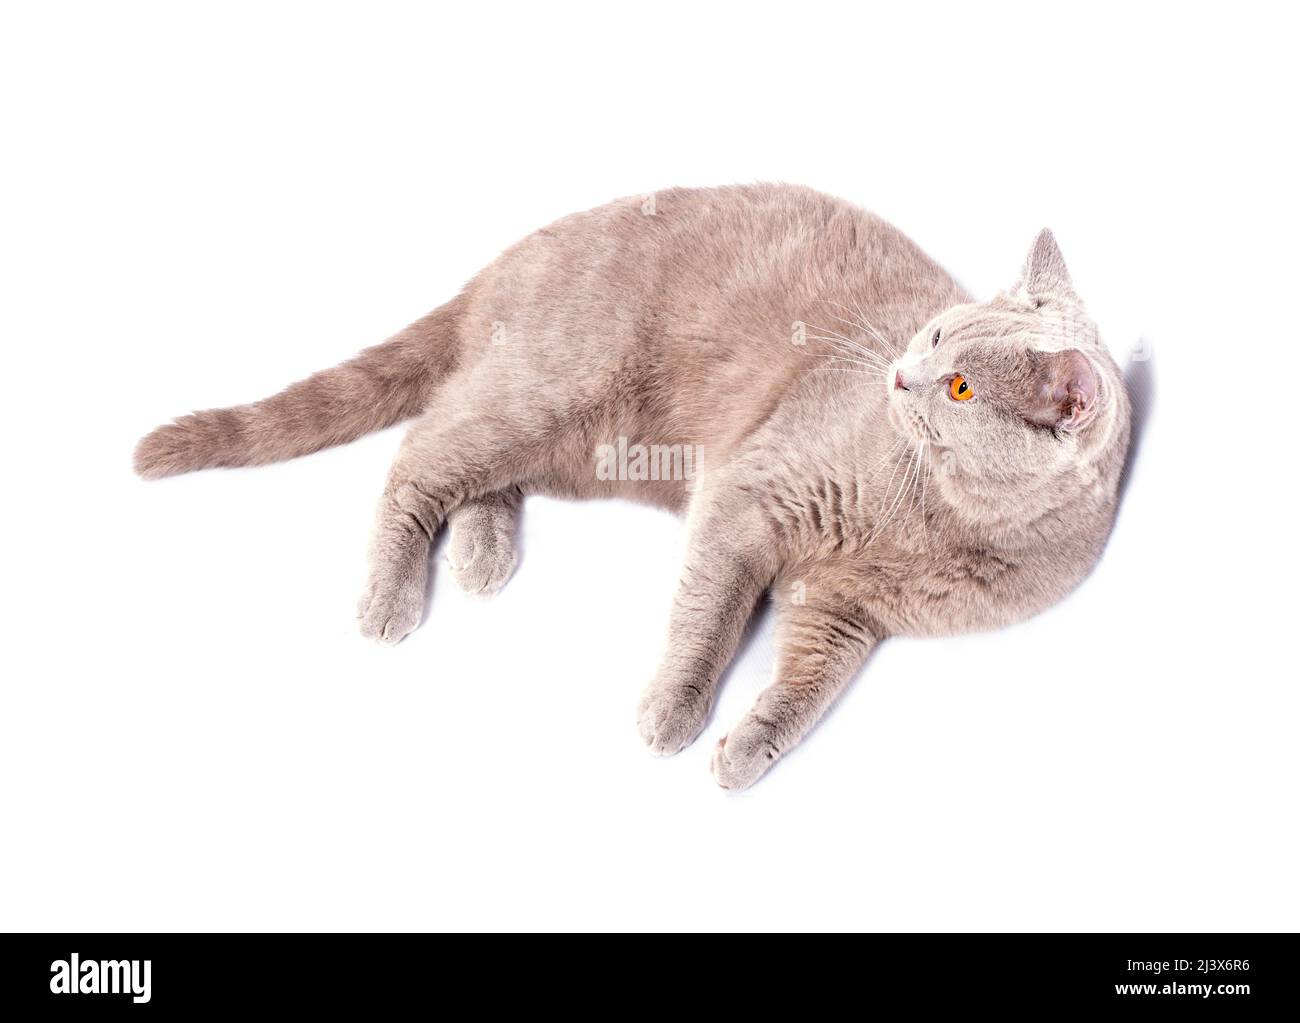 beautiful British cat with orange eyes lying on its side on a white background, isolated image, beautiful domestic cats, cats in the house, pets Stock Photo